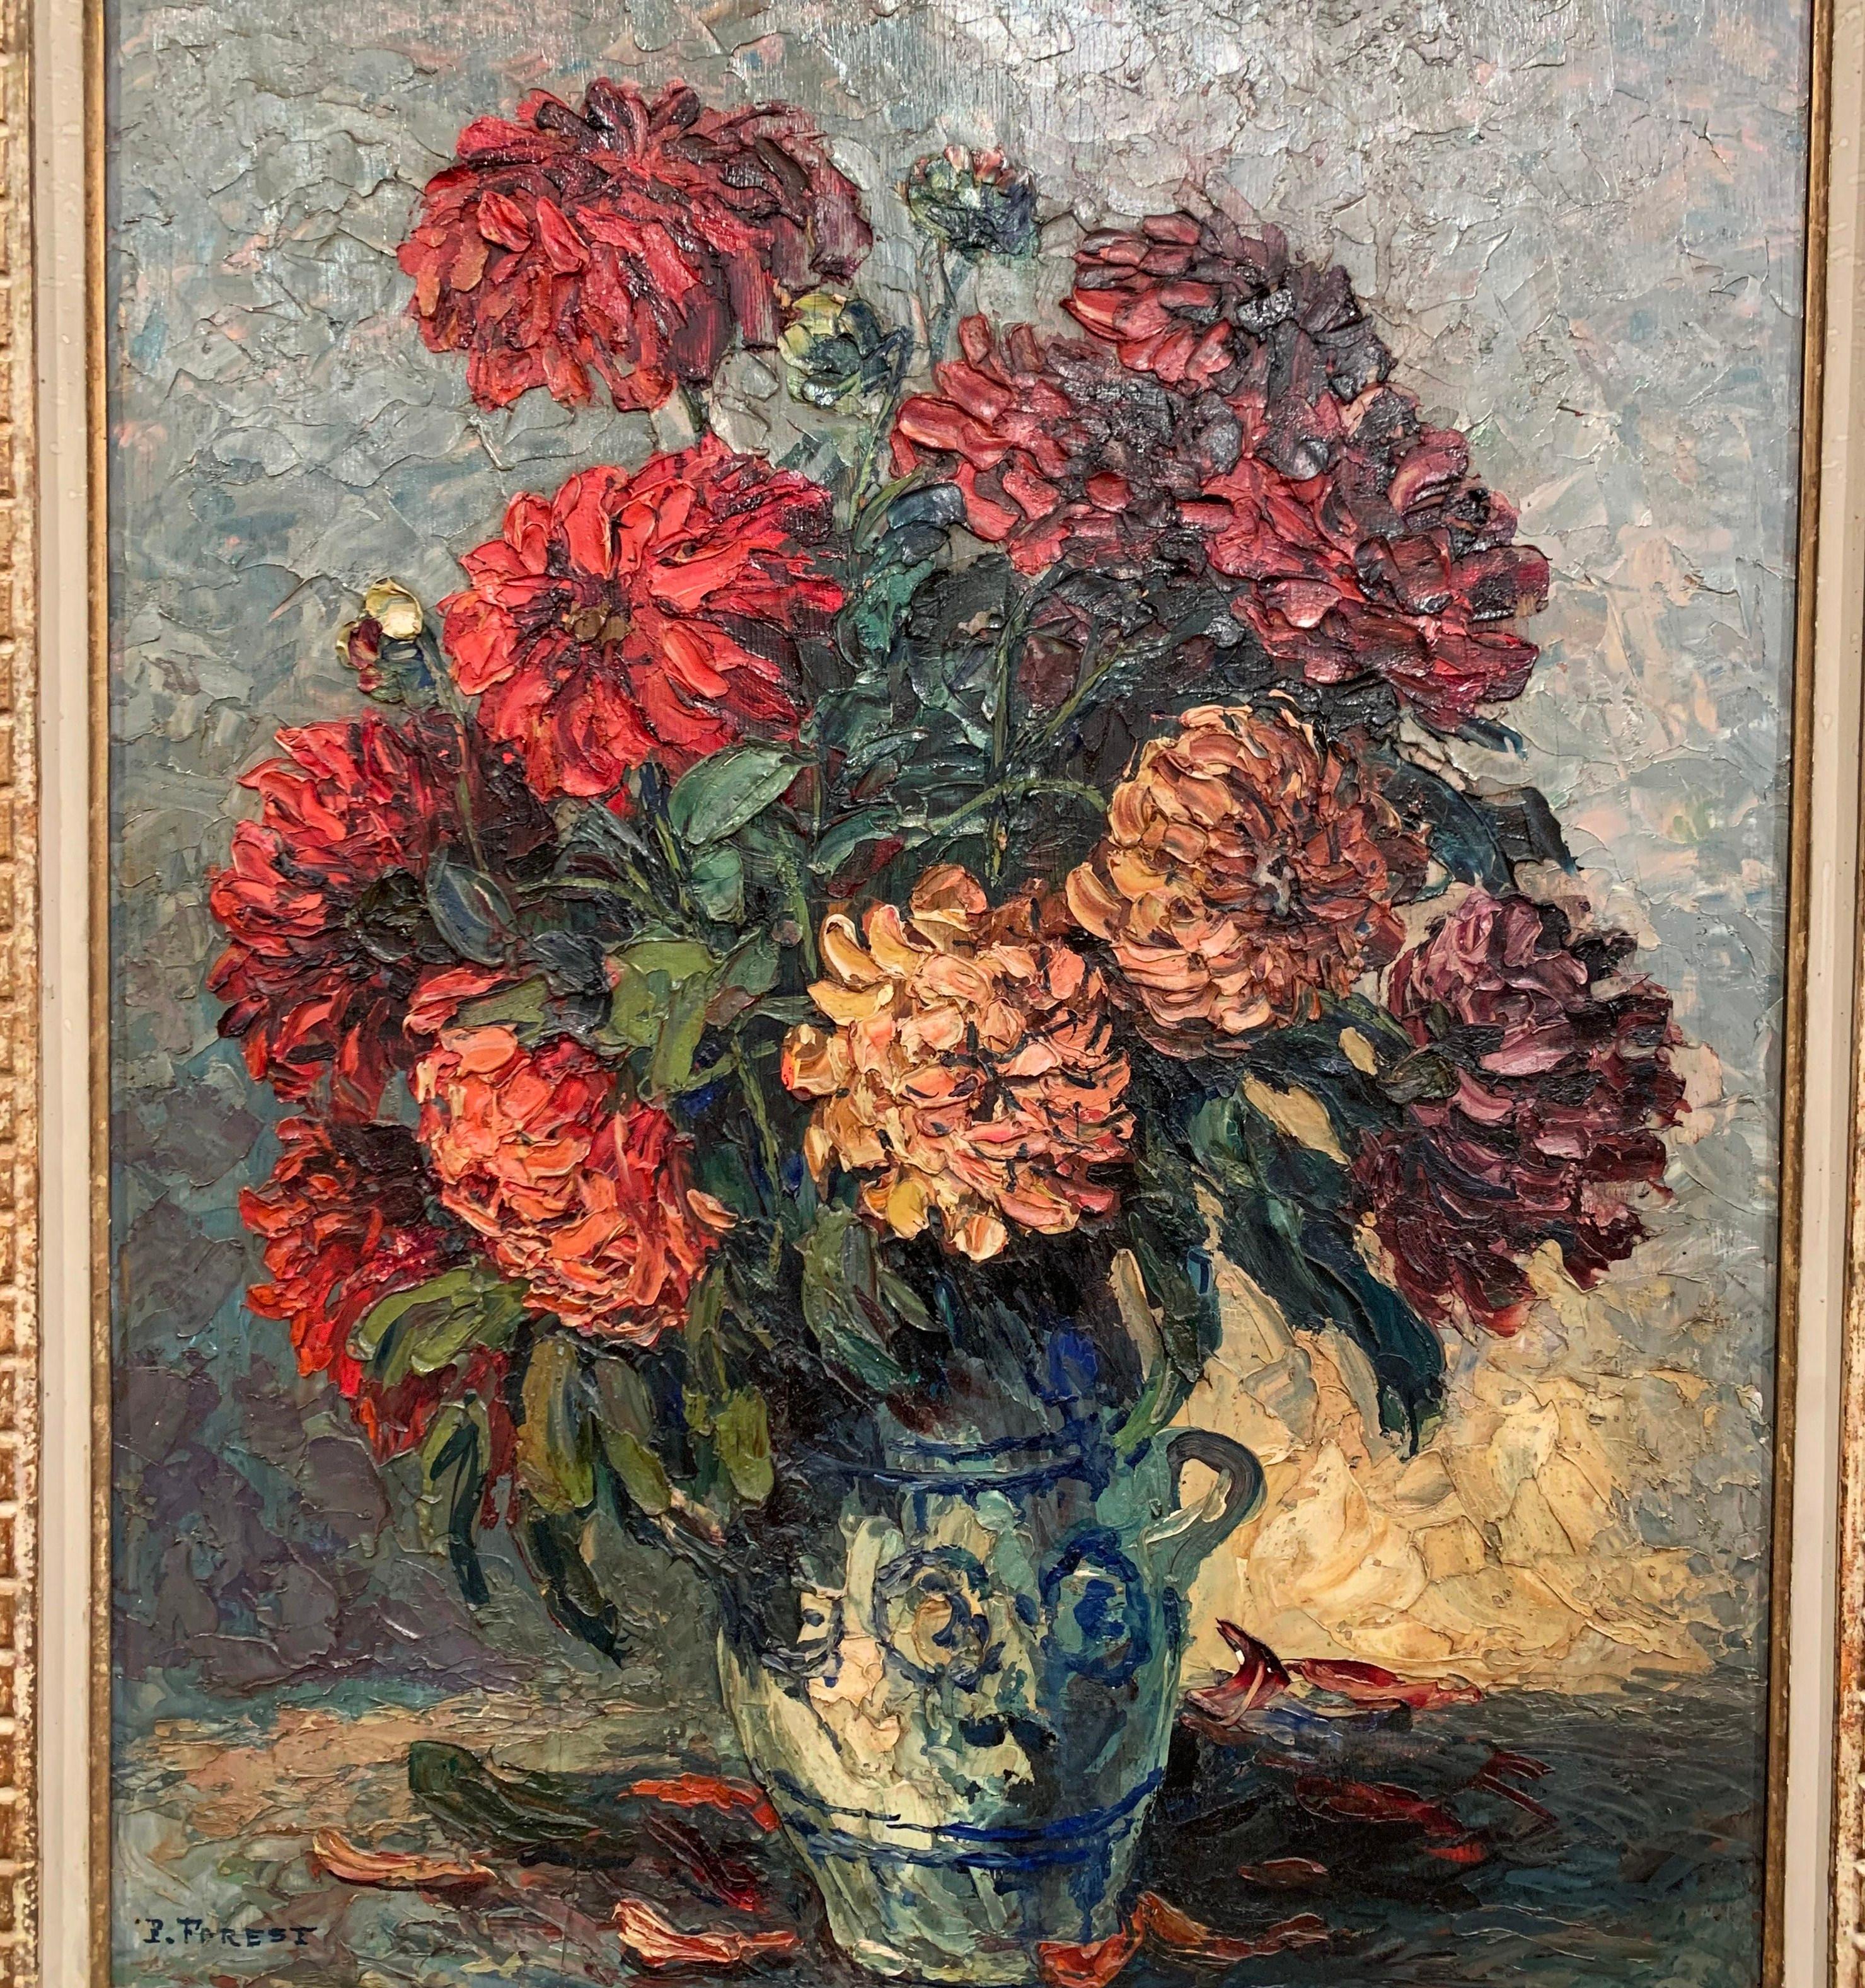 Set in the original carved frame, this large oil on board painting was created in France, circa 1910. The art work depicts a large bouquet of flowers inside a Provencal ceramic vase. The painting is signed in the lower left corner by the artist, P.